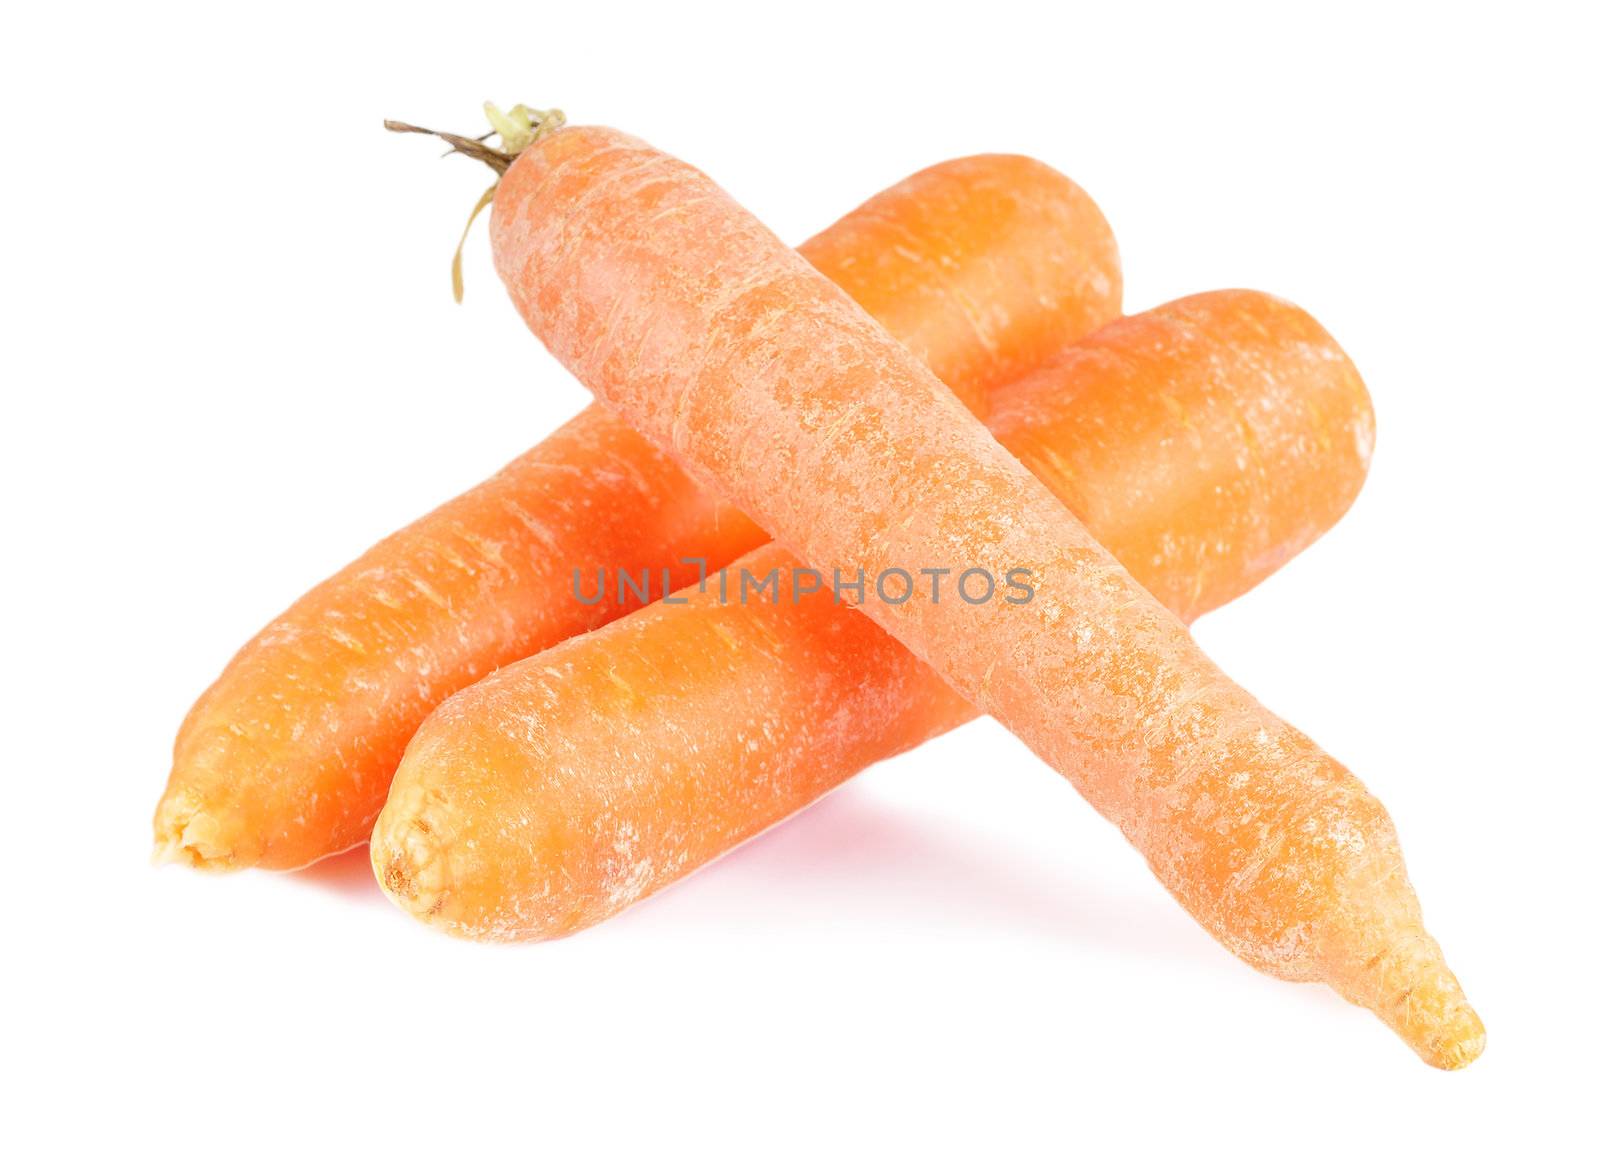 Three carrots on a white background